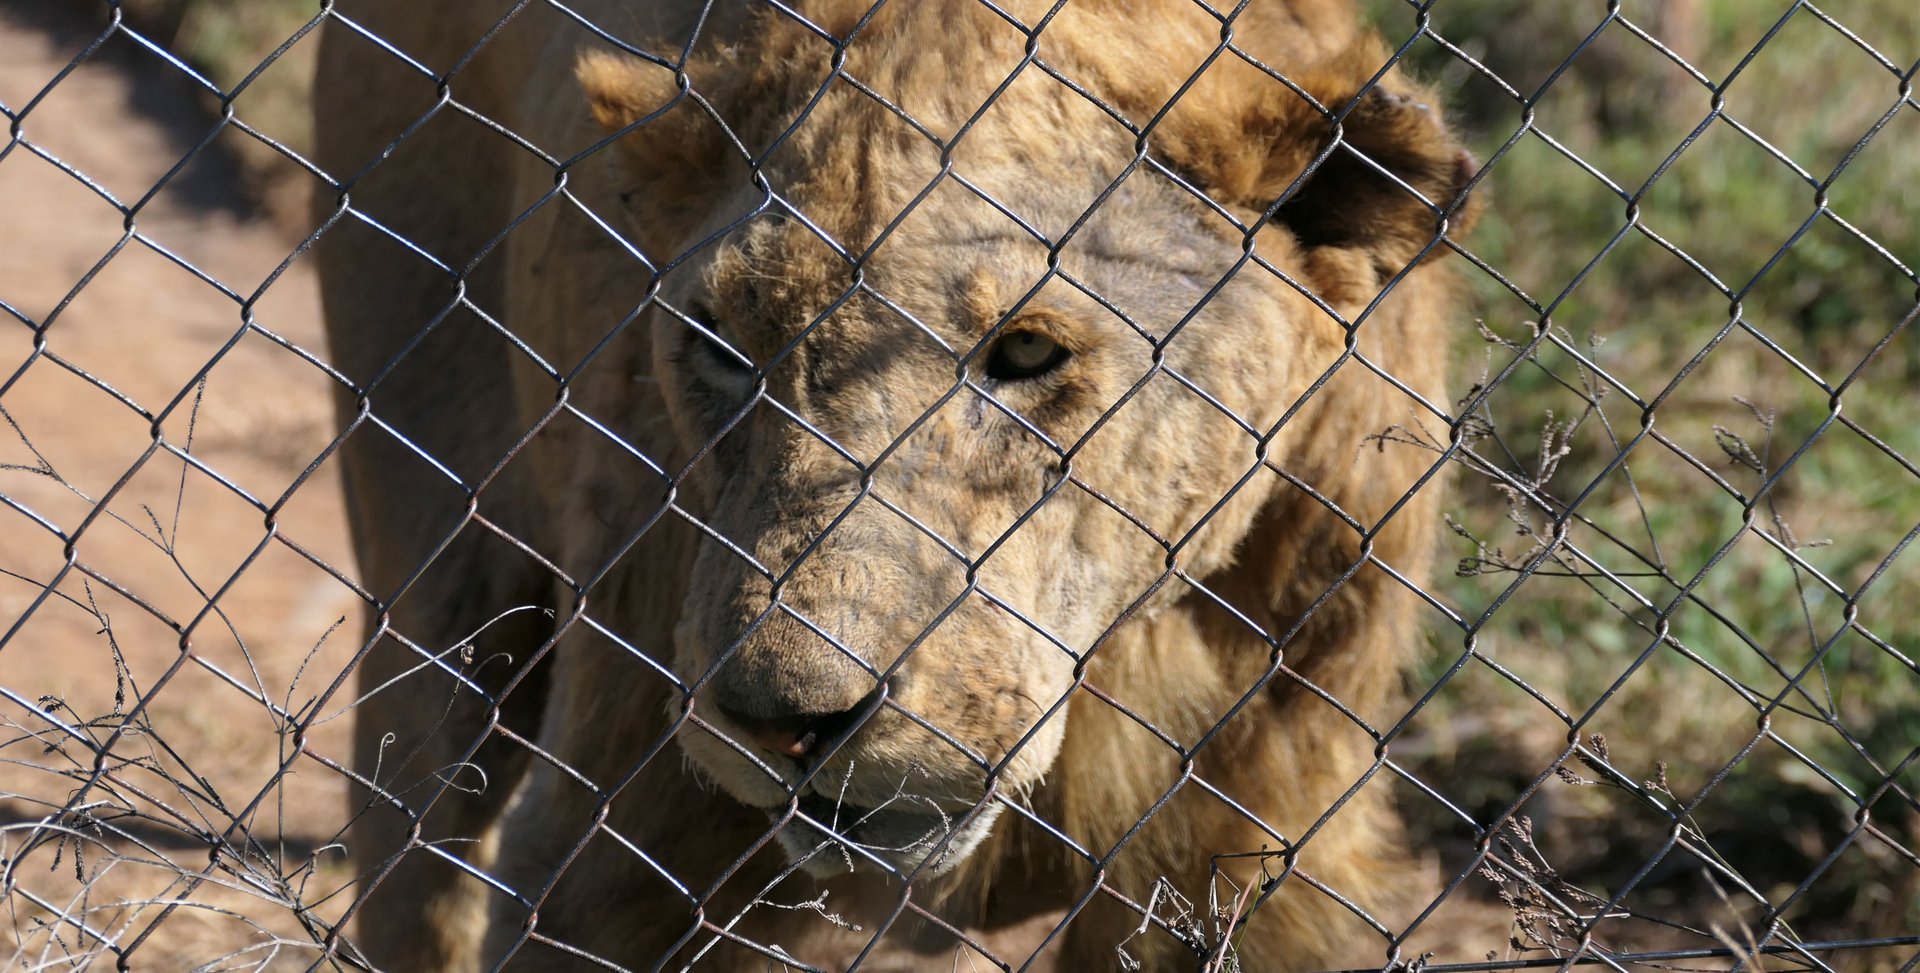 Commercially bred captive lion at poor quality facility